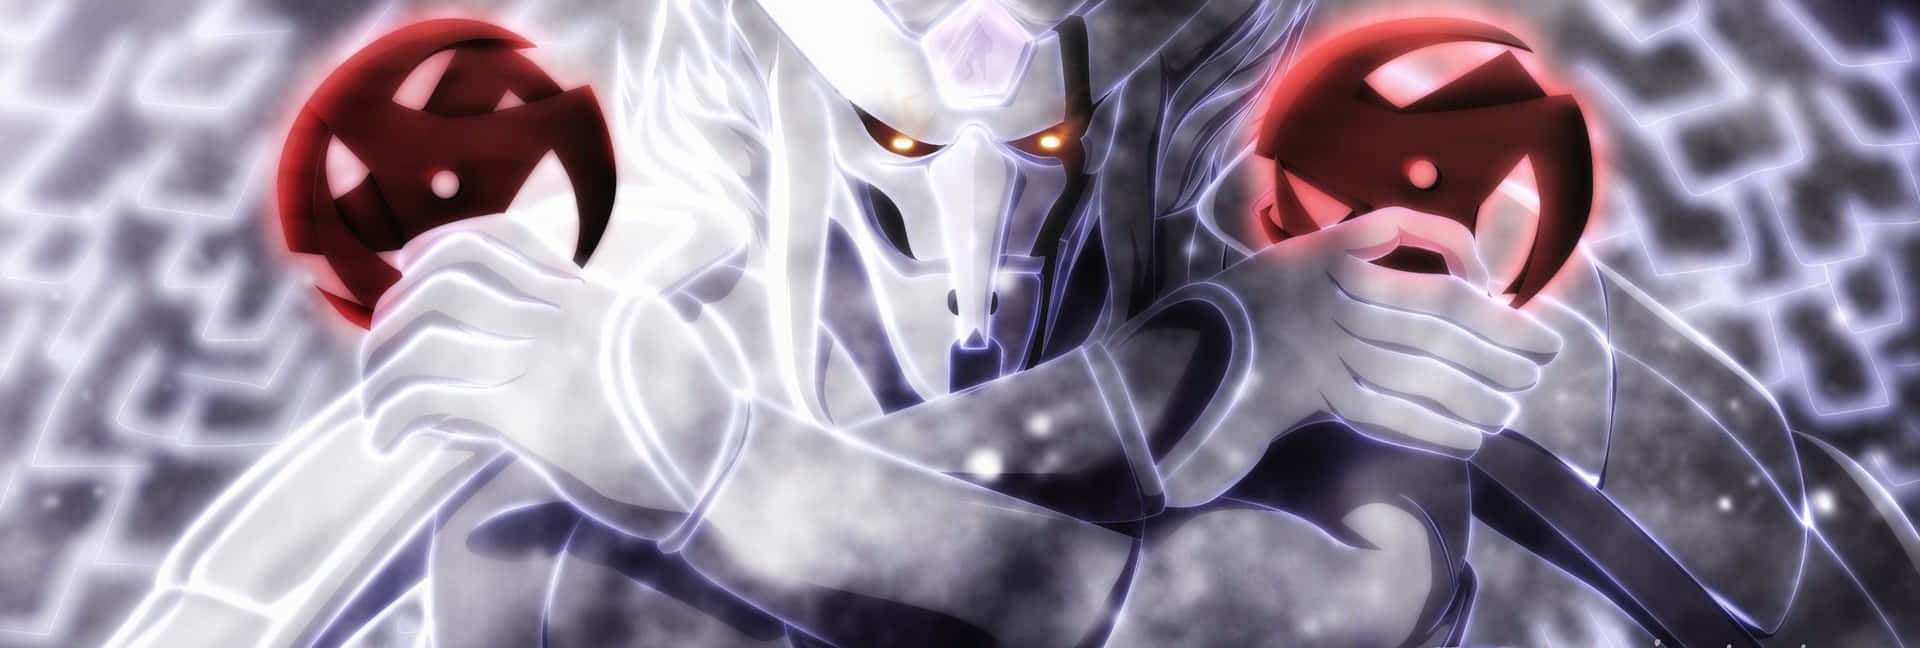 Kakashi Susanoo, the coveted Godly form Wallpaper